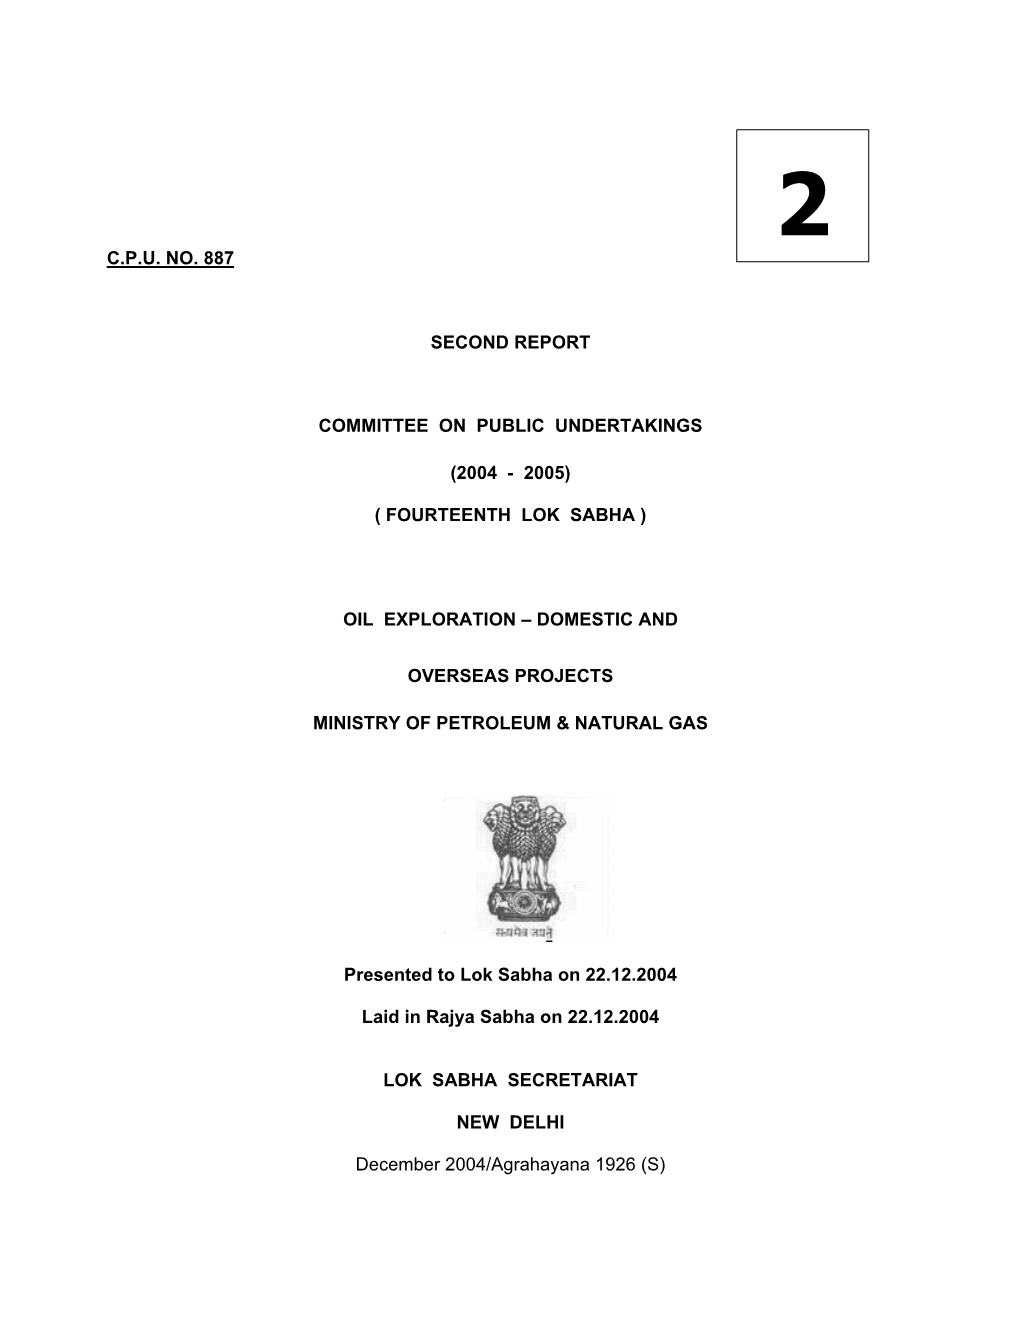 C.P.U. No. 887 Second Report Committee on Public